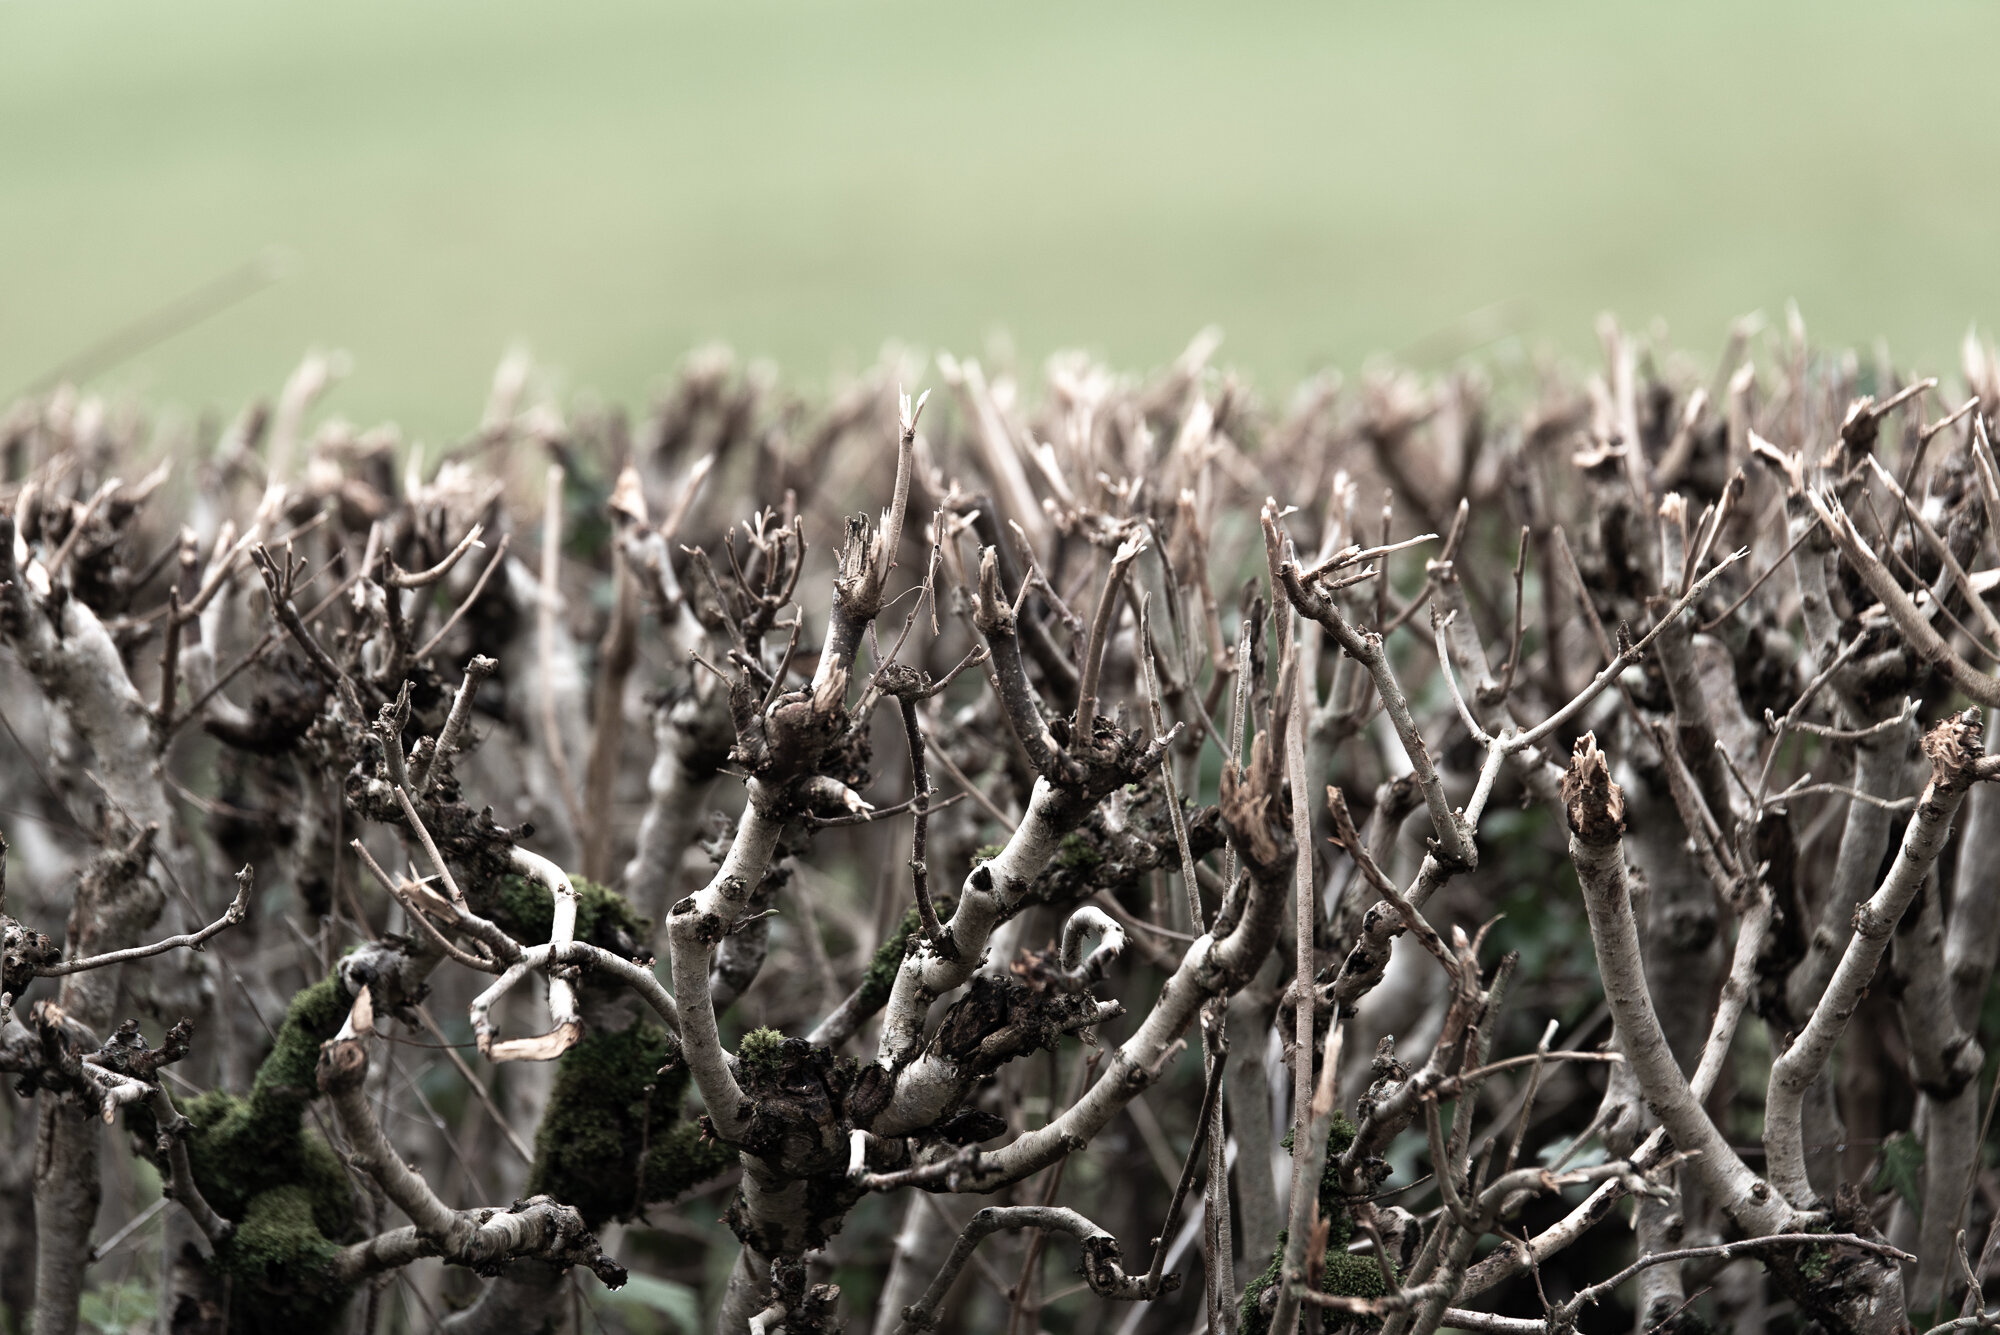 Flailed hedge - for looks not nature